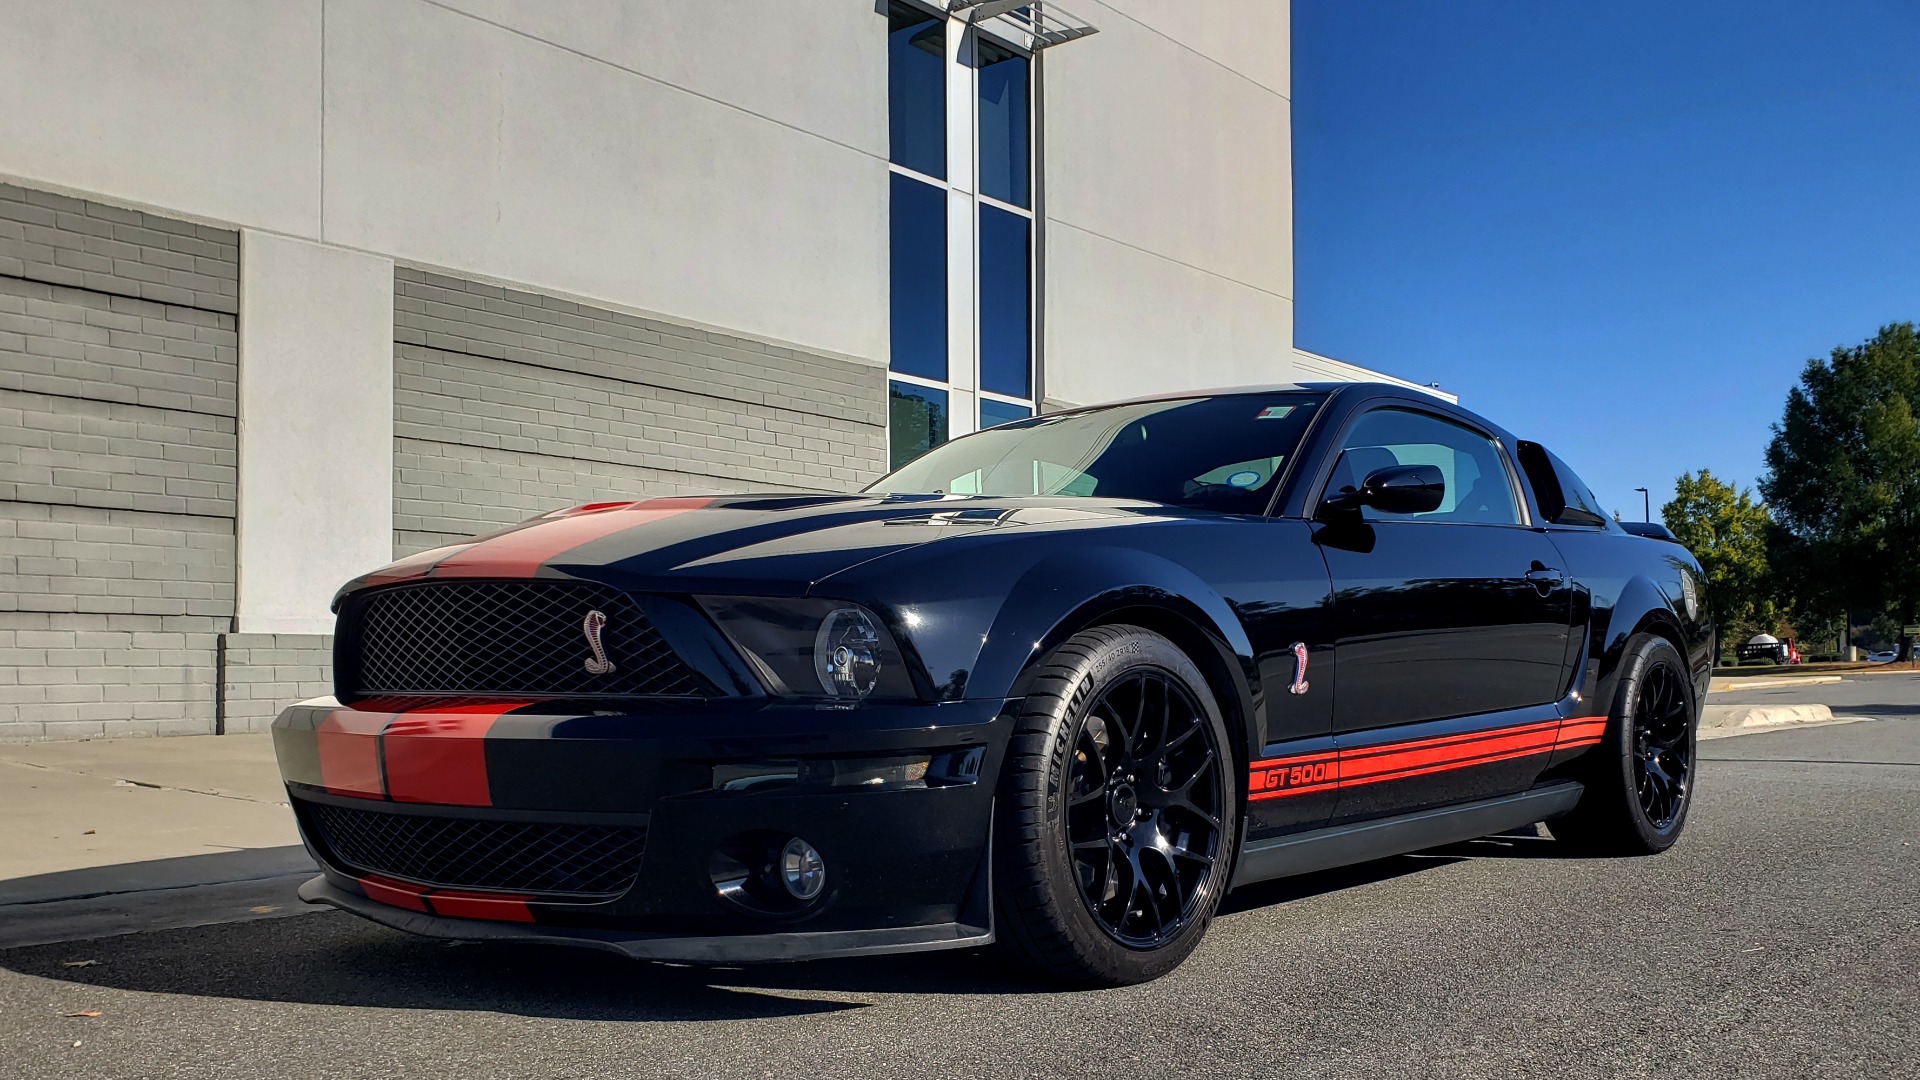 Used 2009 Ford MUSTANG SHELBY GT500 / RED SNAKE EDITION / UPGRADED 750RWHP / NAV / SHAKER SND for sale Sold at Formula Imports in Charlotte NC 28227 5